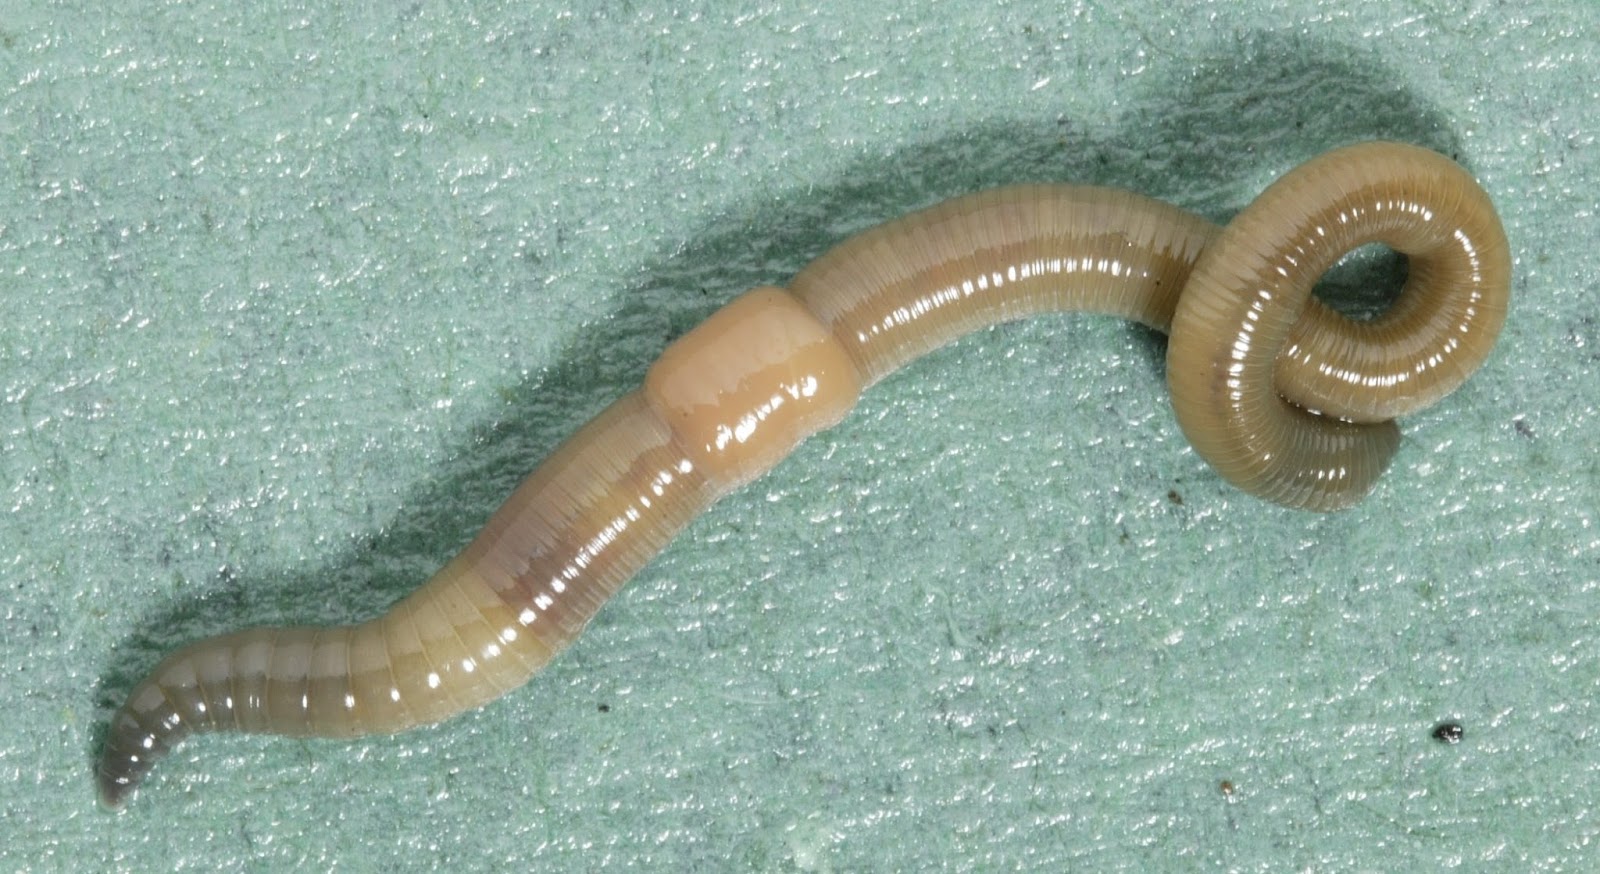 Timeless Environments: Earthworms & the mechanical functions they